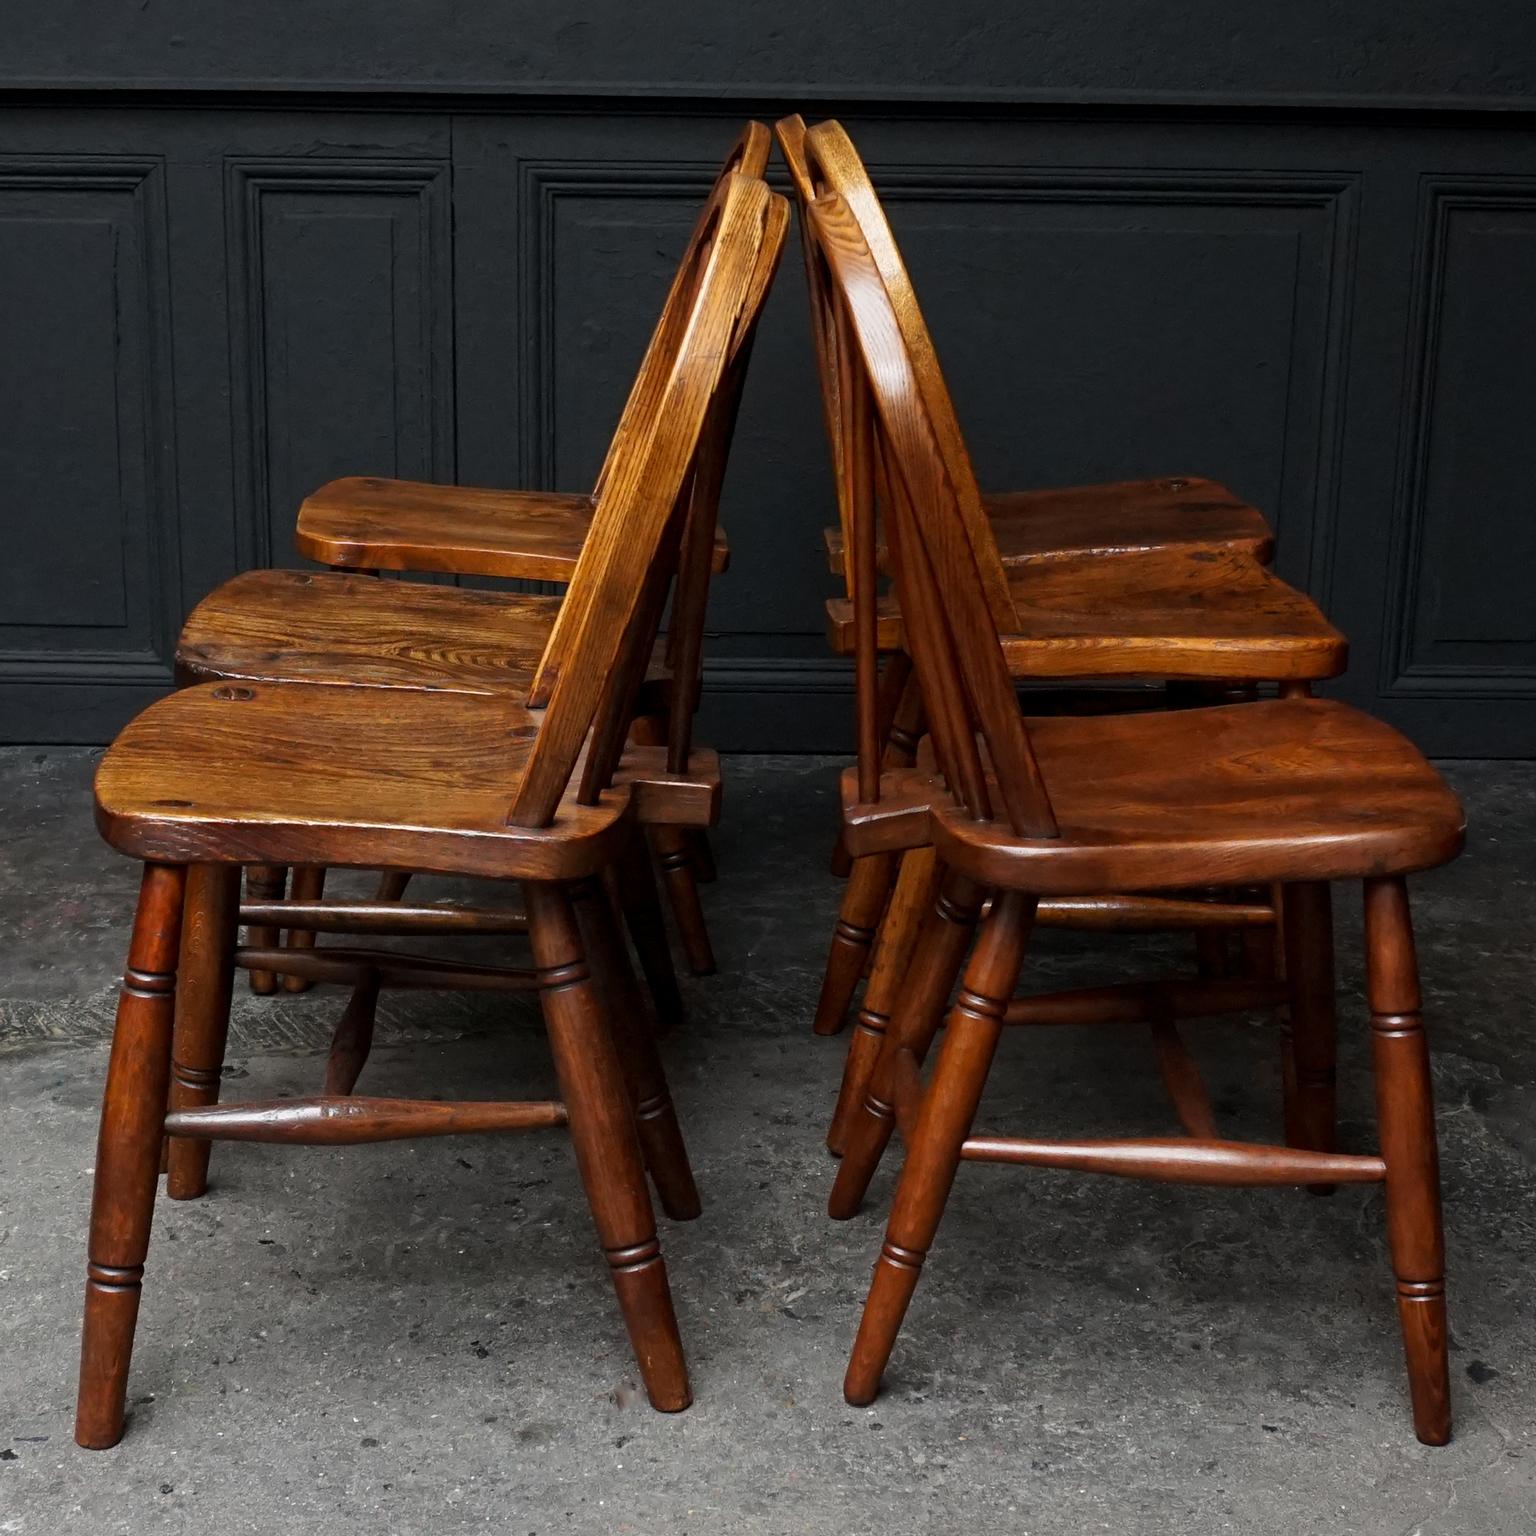 Magnificent set of 6 Windsor elm wood 'Hoop Back' chairs from the 19th century-England without armrests.
Very nice set which stands out by its good sturdy hand made quality. 
Some of the chairs are stamped under the seat with different Initials and